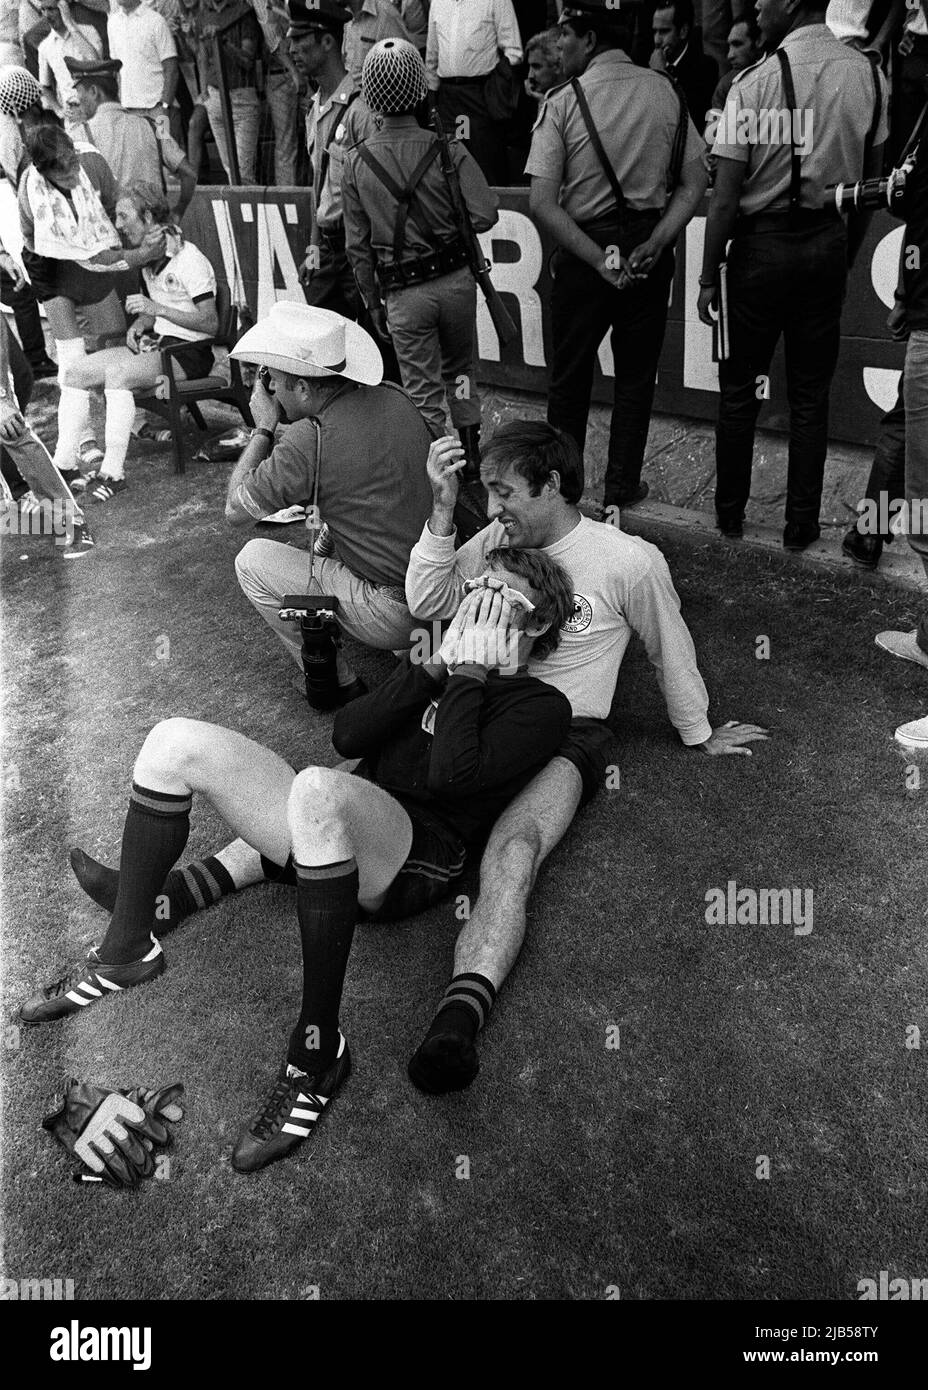 ARCHIVE PHOTO: Horst Wolter celebrates his 80th birthday on June 8, 2022, 01SN BRD ITA1970SP.jpg Football World Cup 1970 in Mexico Mexico, semifinals BRD Germany - Italy 3:4 after extra time, the German goalkeeper Sepp MAIER and substitute goalkeeper Horst WOLTER sit exhausted dejected on ground, 06/17/1970. black and white shot Stock Photo